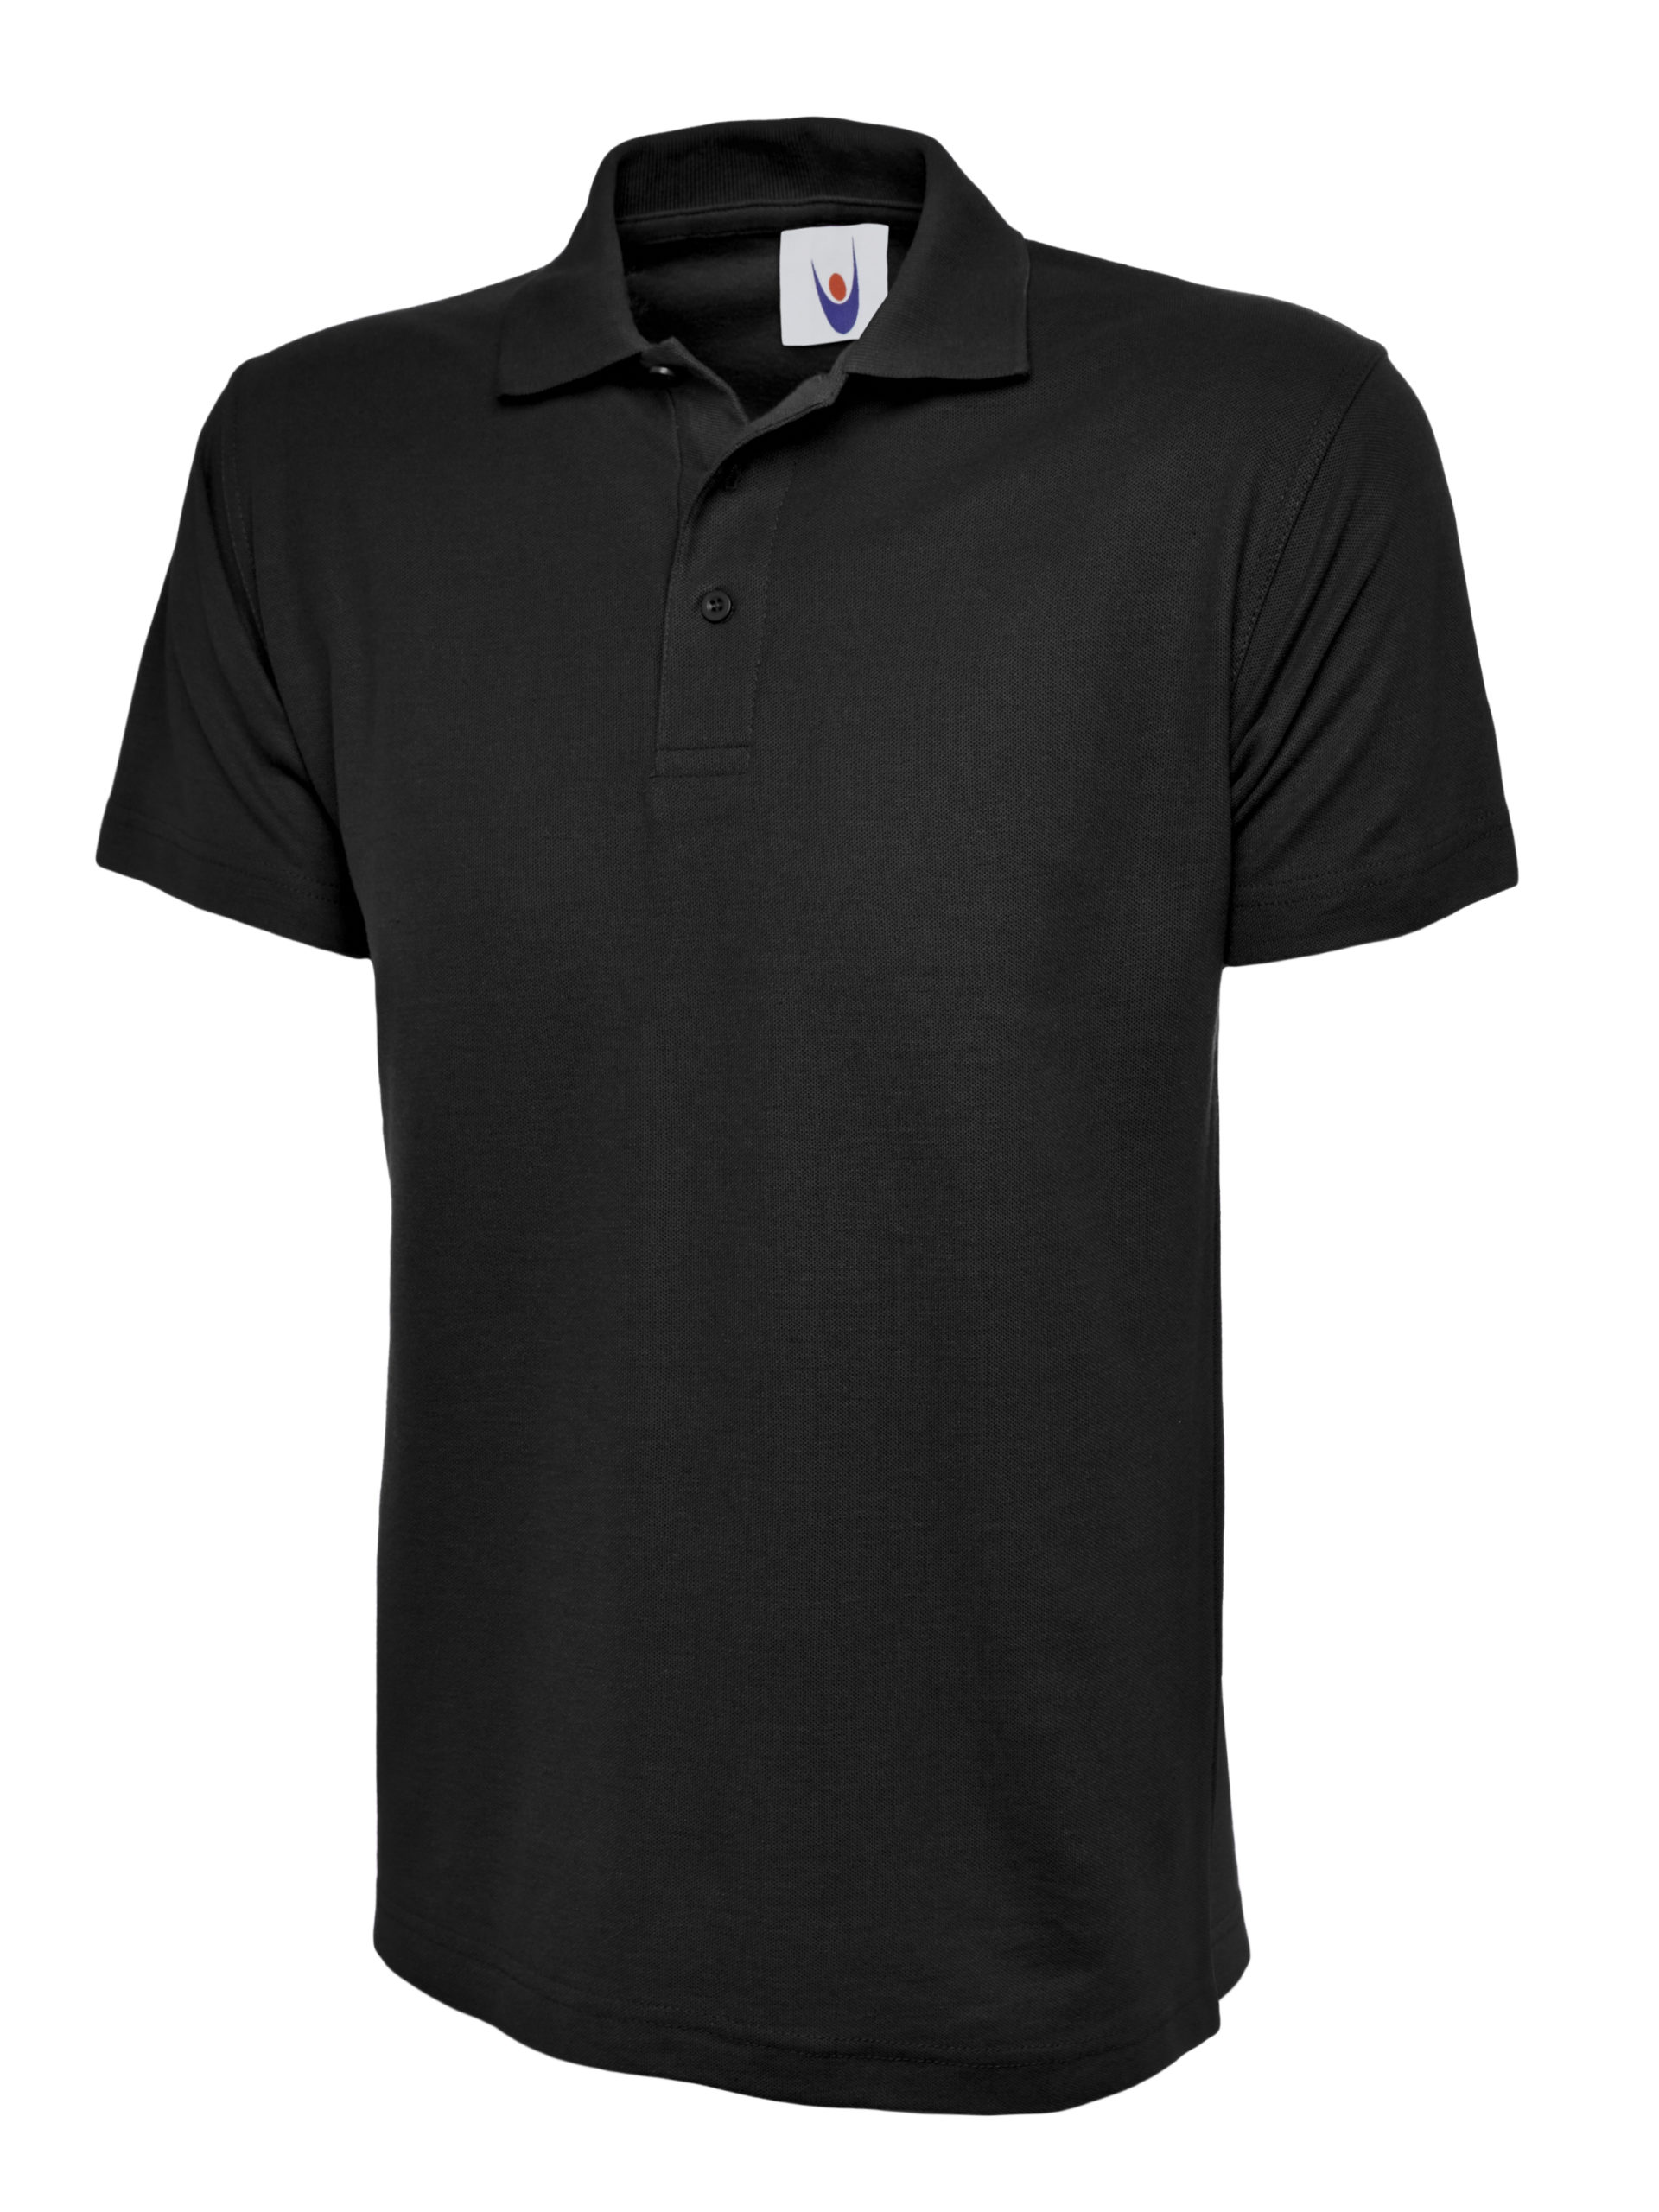 UC101 Uneek Classic Men's Embroidered Polo Shirt